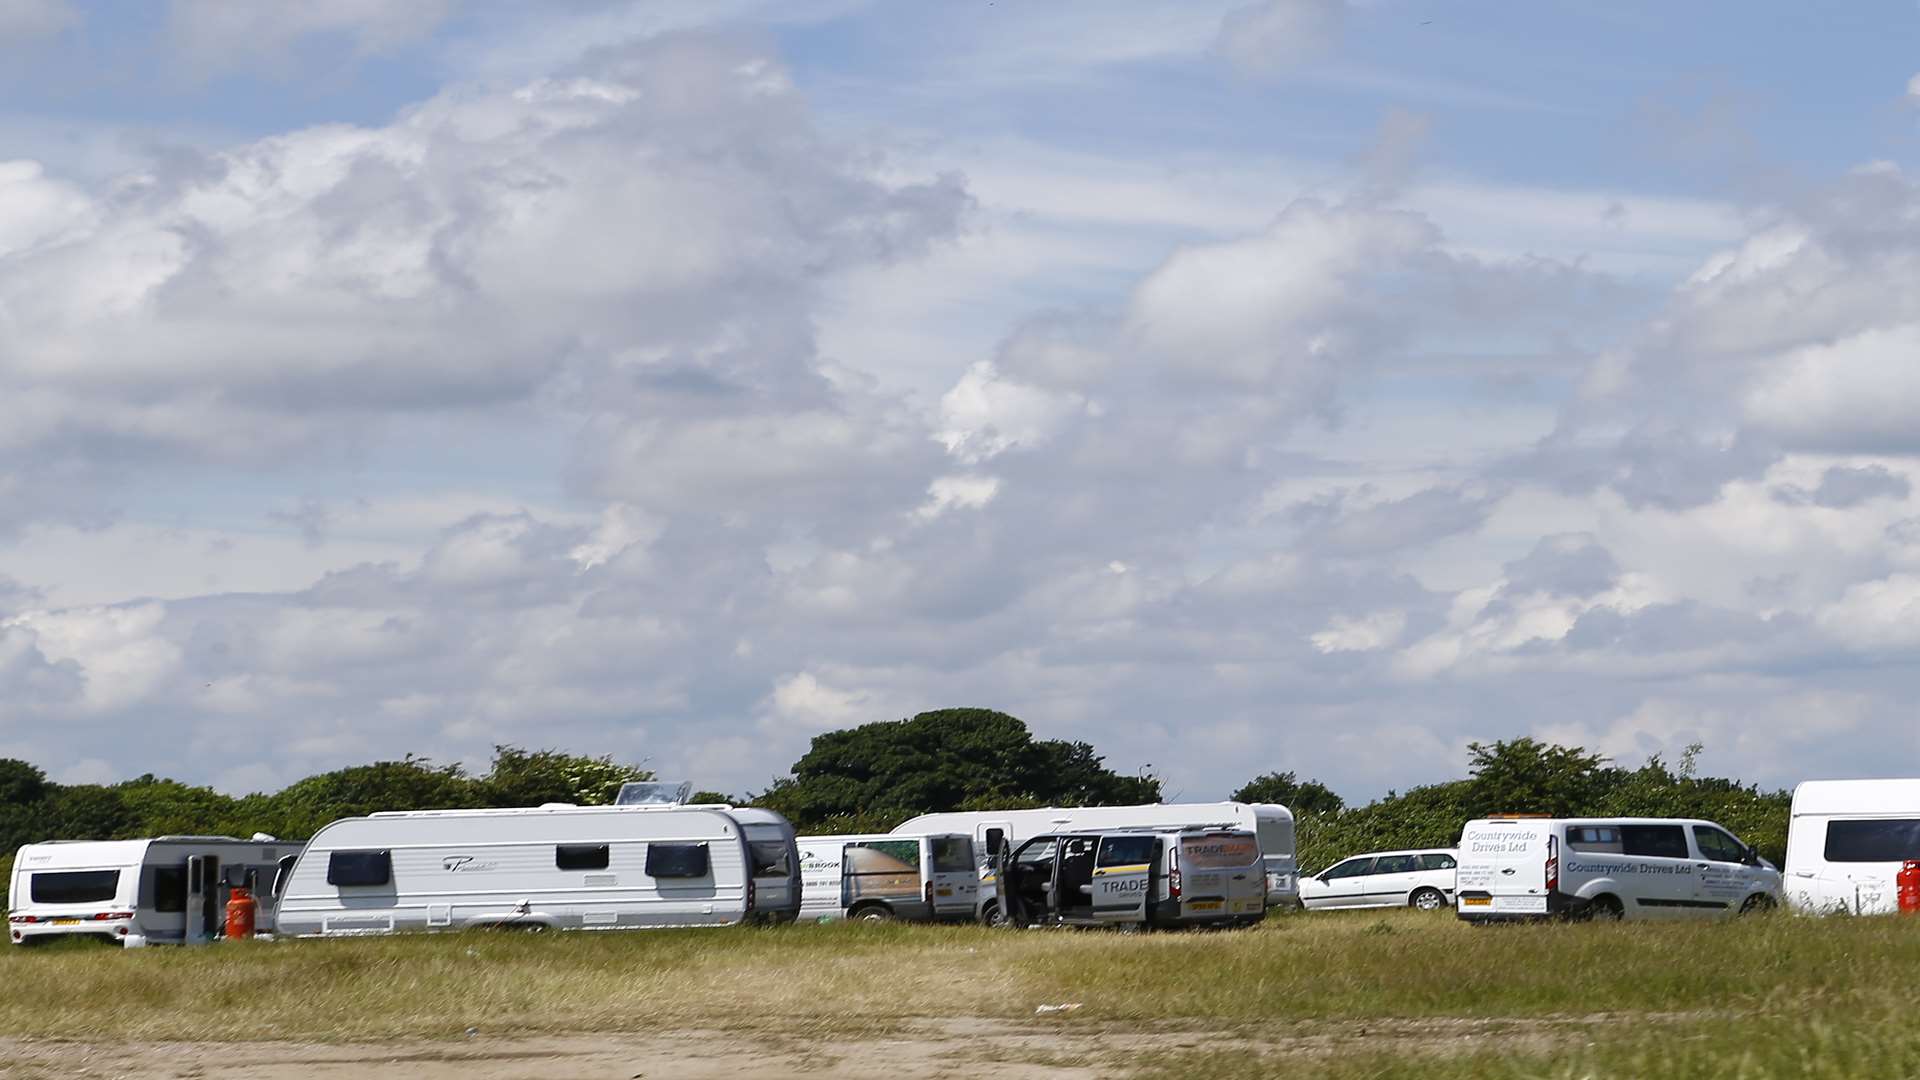 The travellers set up camp in Manston Road, Ramsgate